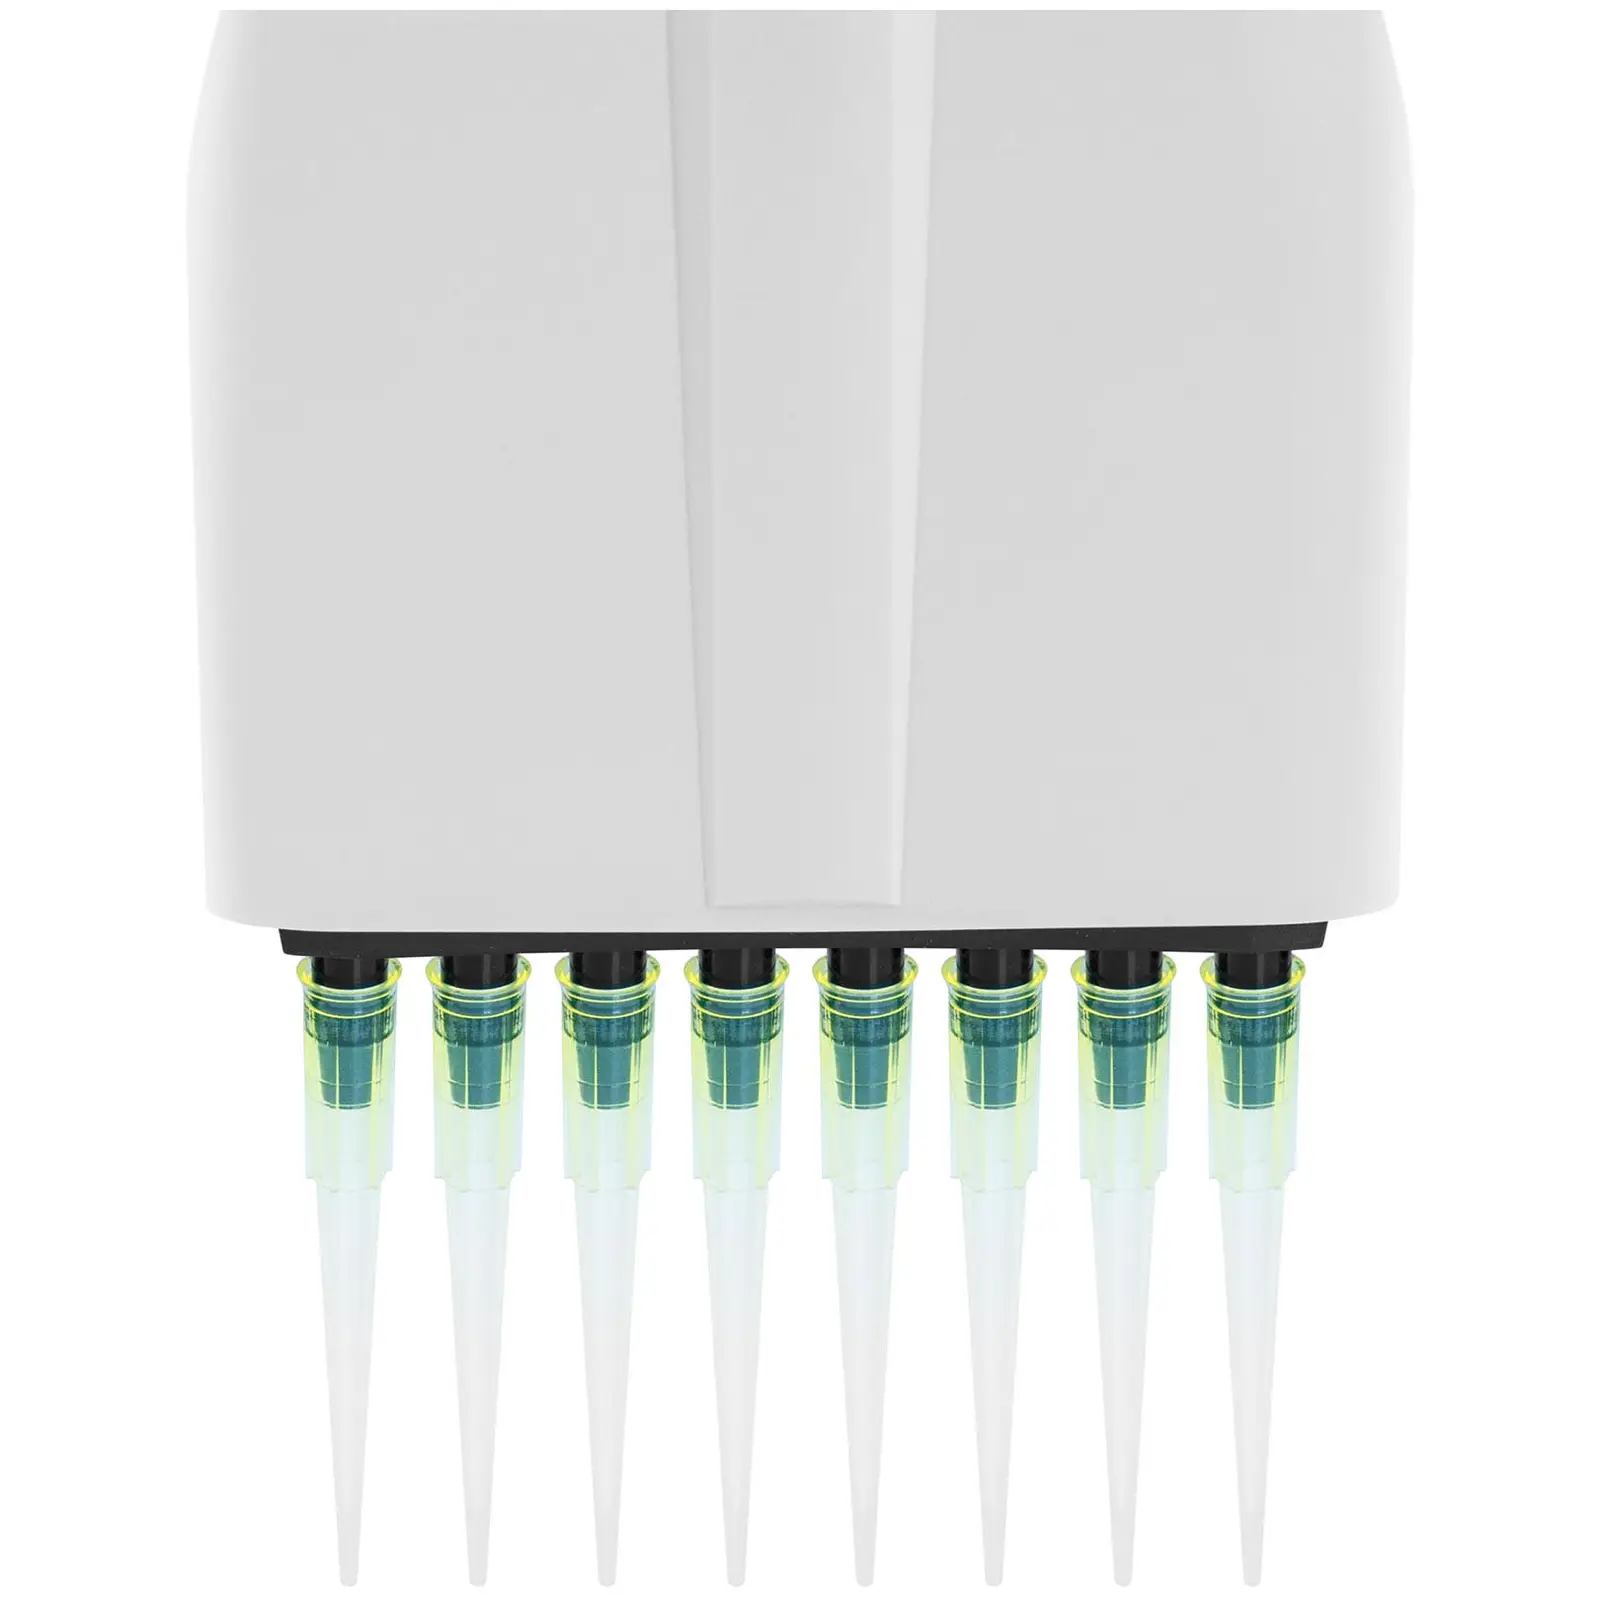 Multi-channel pipette for 8 tips 5 - 50 μl